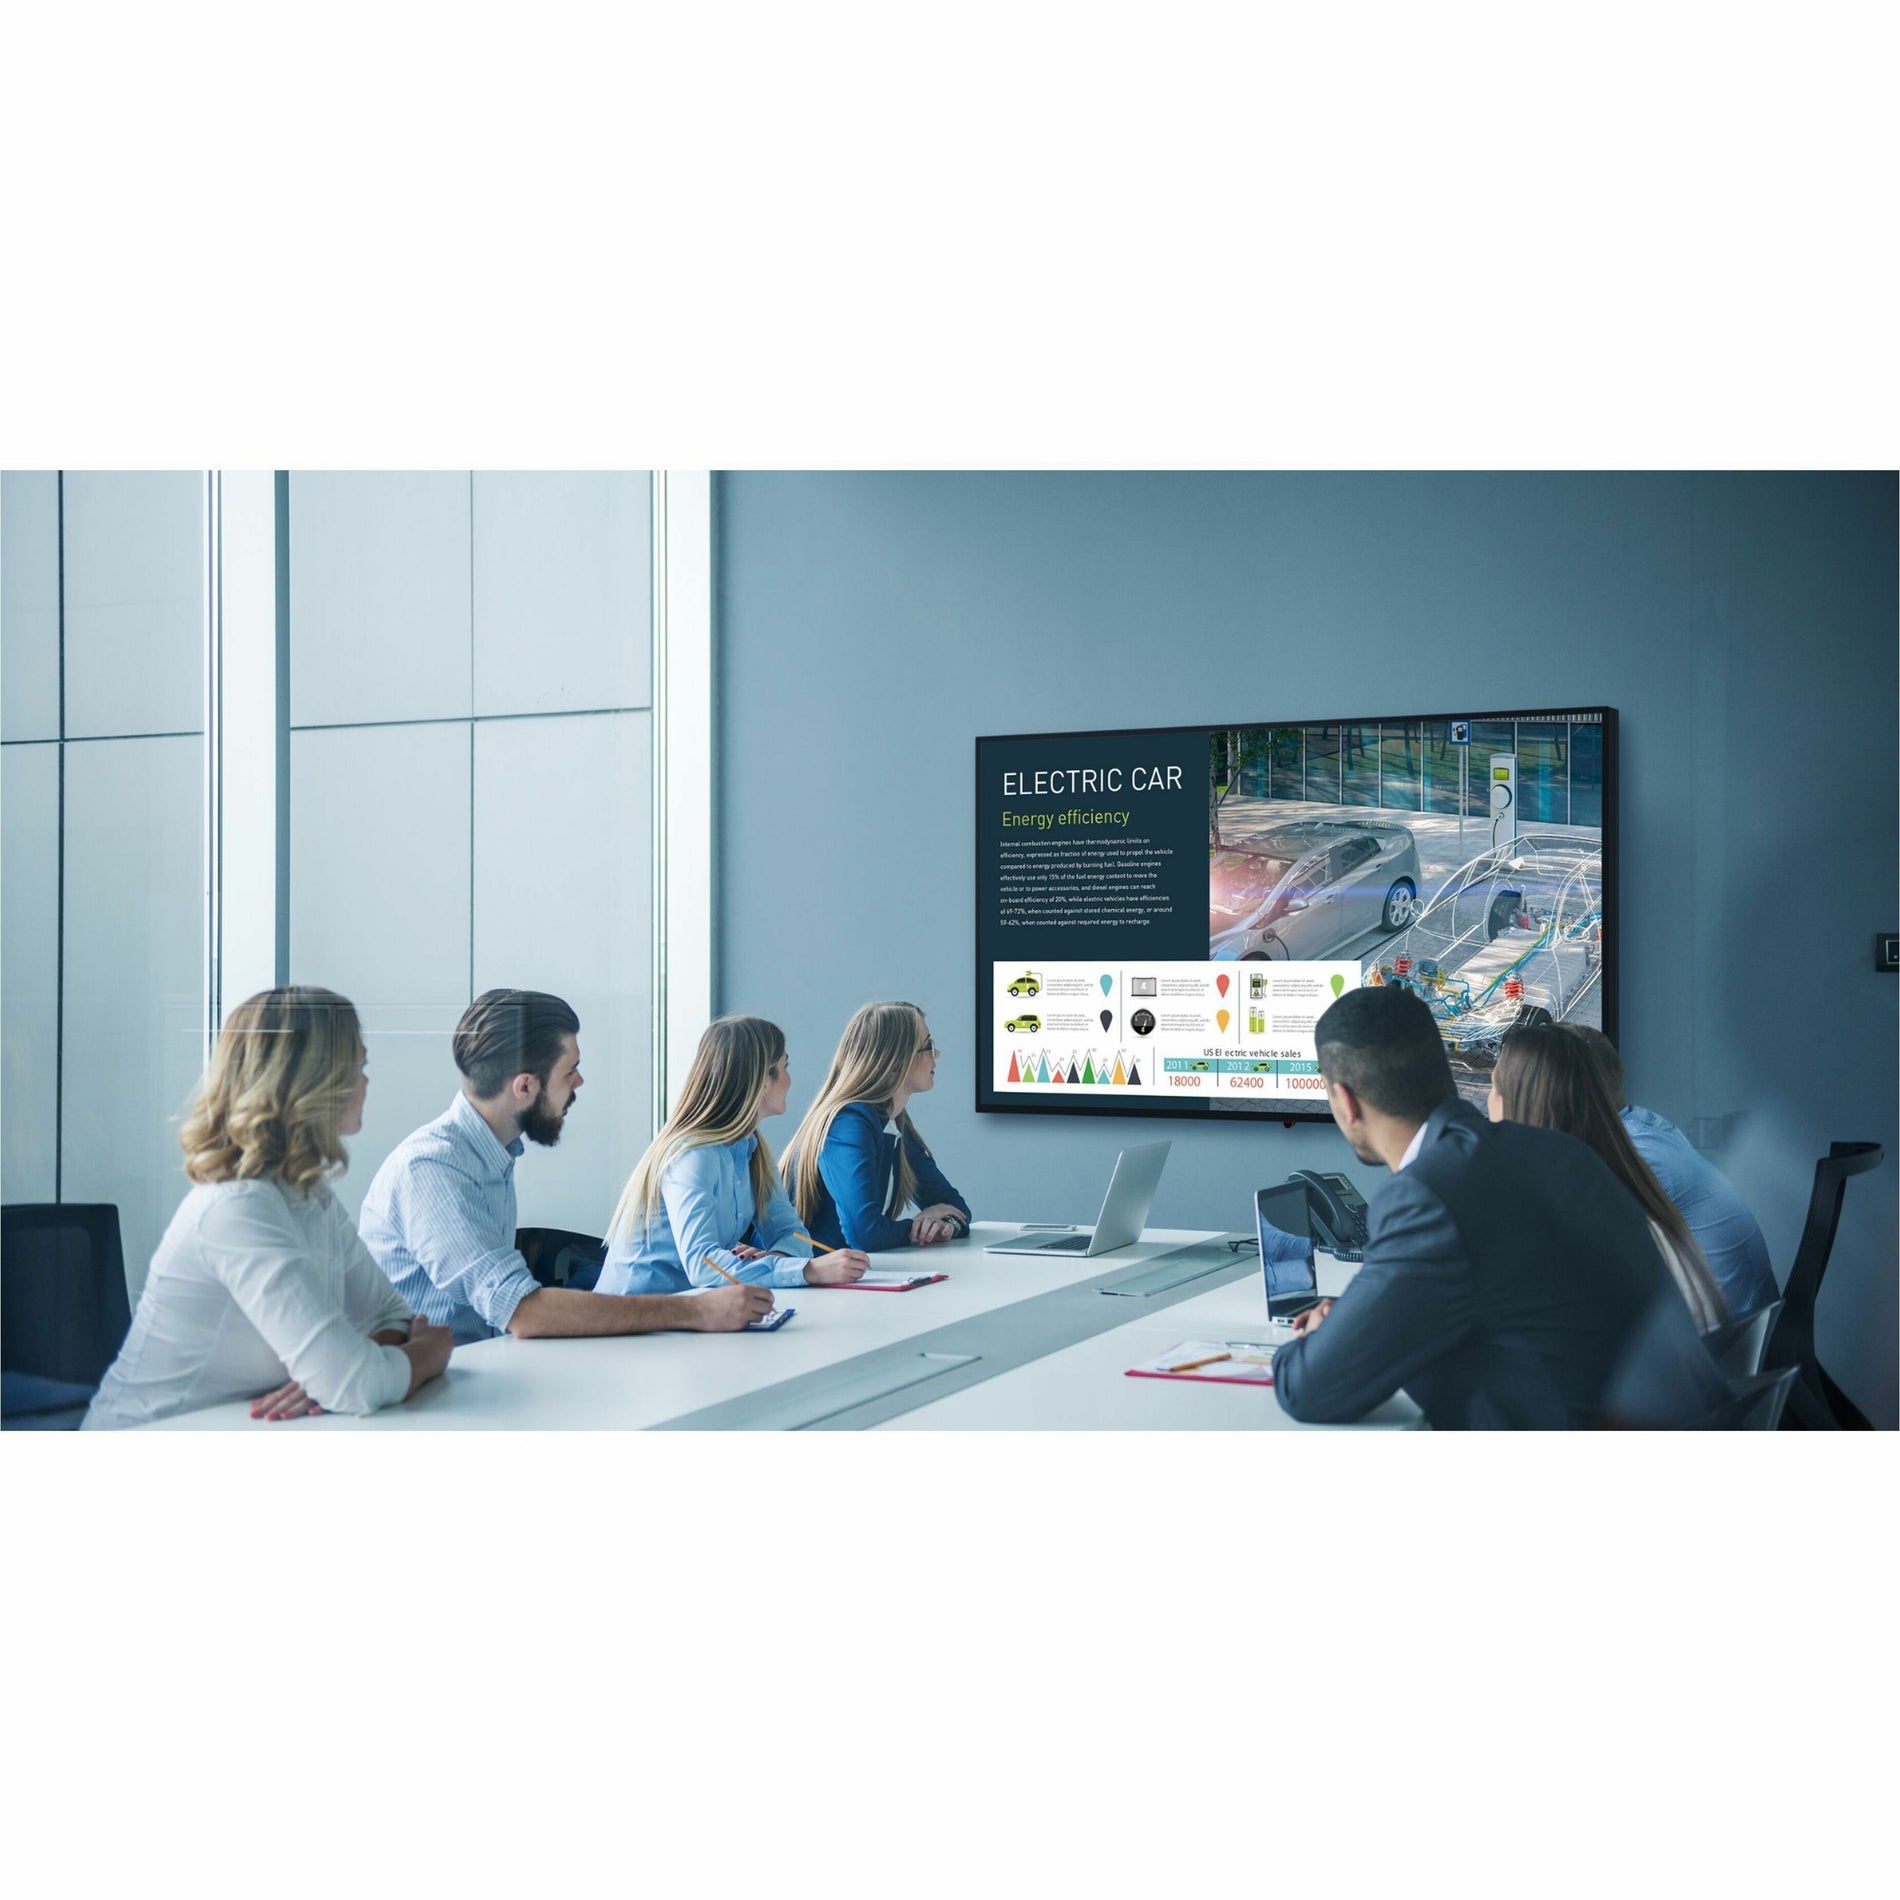 Panasonic TH-65CQE2U 65-inch Class 4K UHD Entry-Level Display, Bright and Vibrant Visuals for Corporate, Education, and Sports Bar Applications